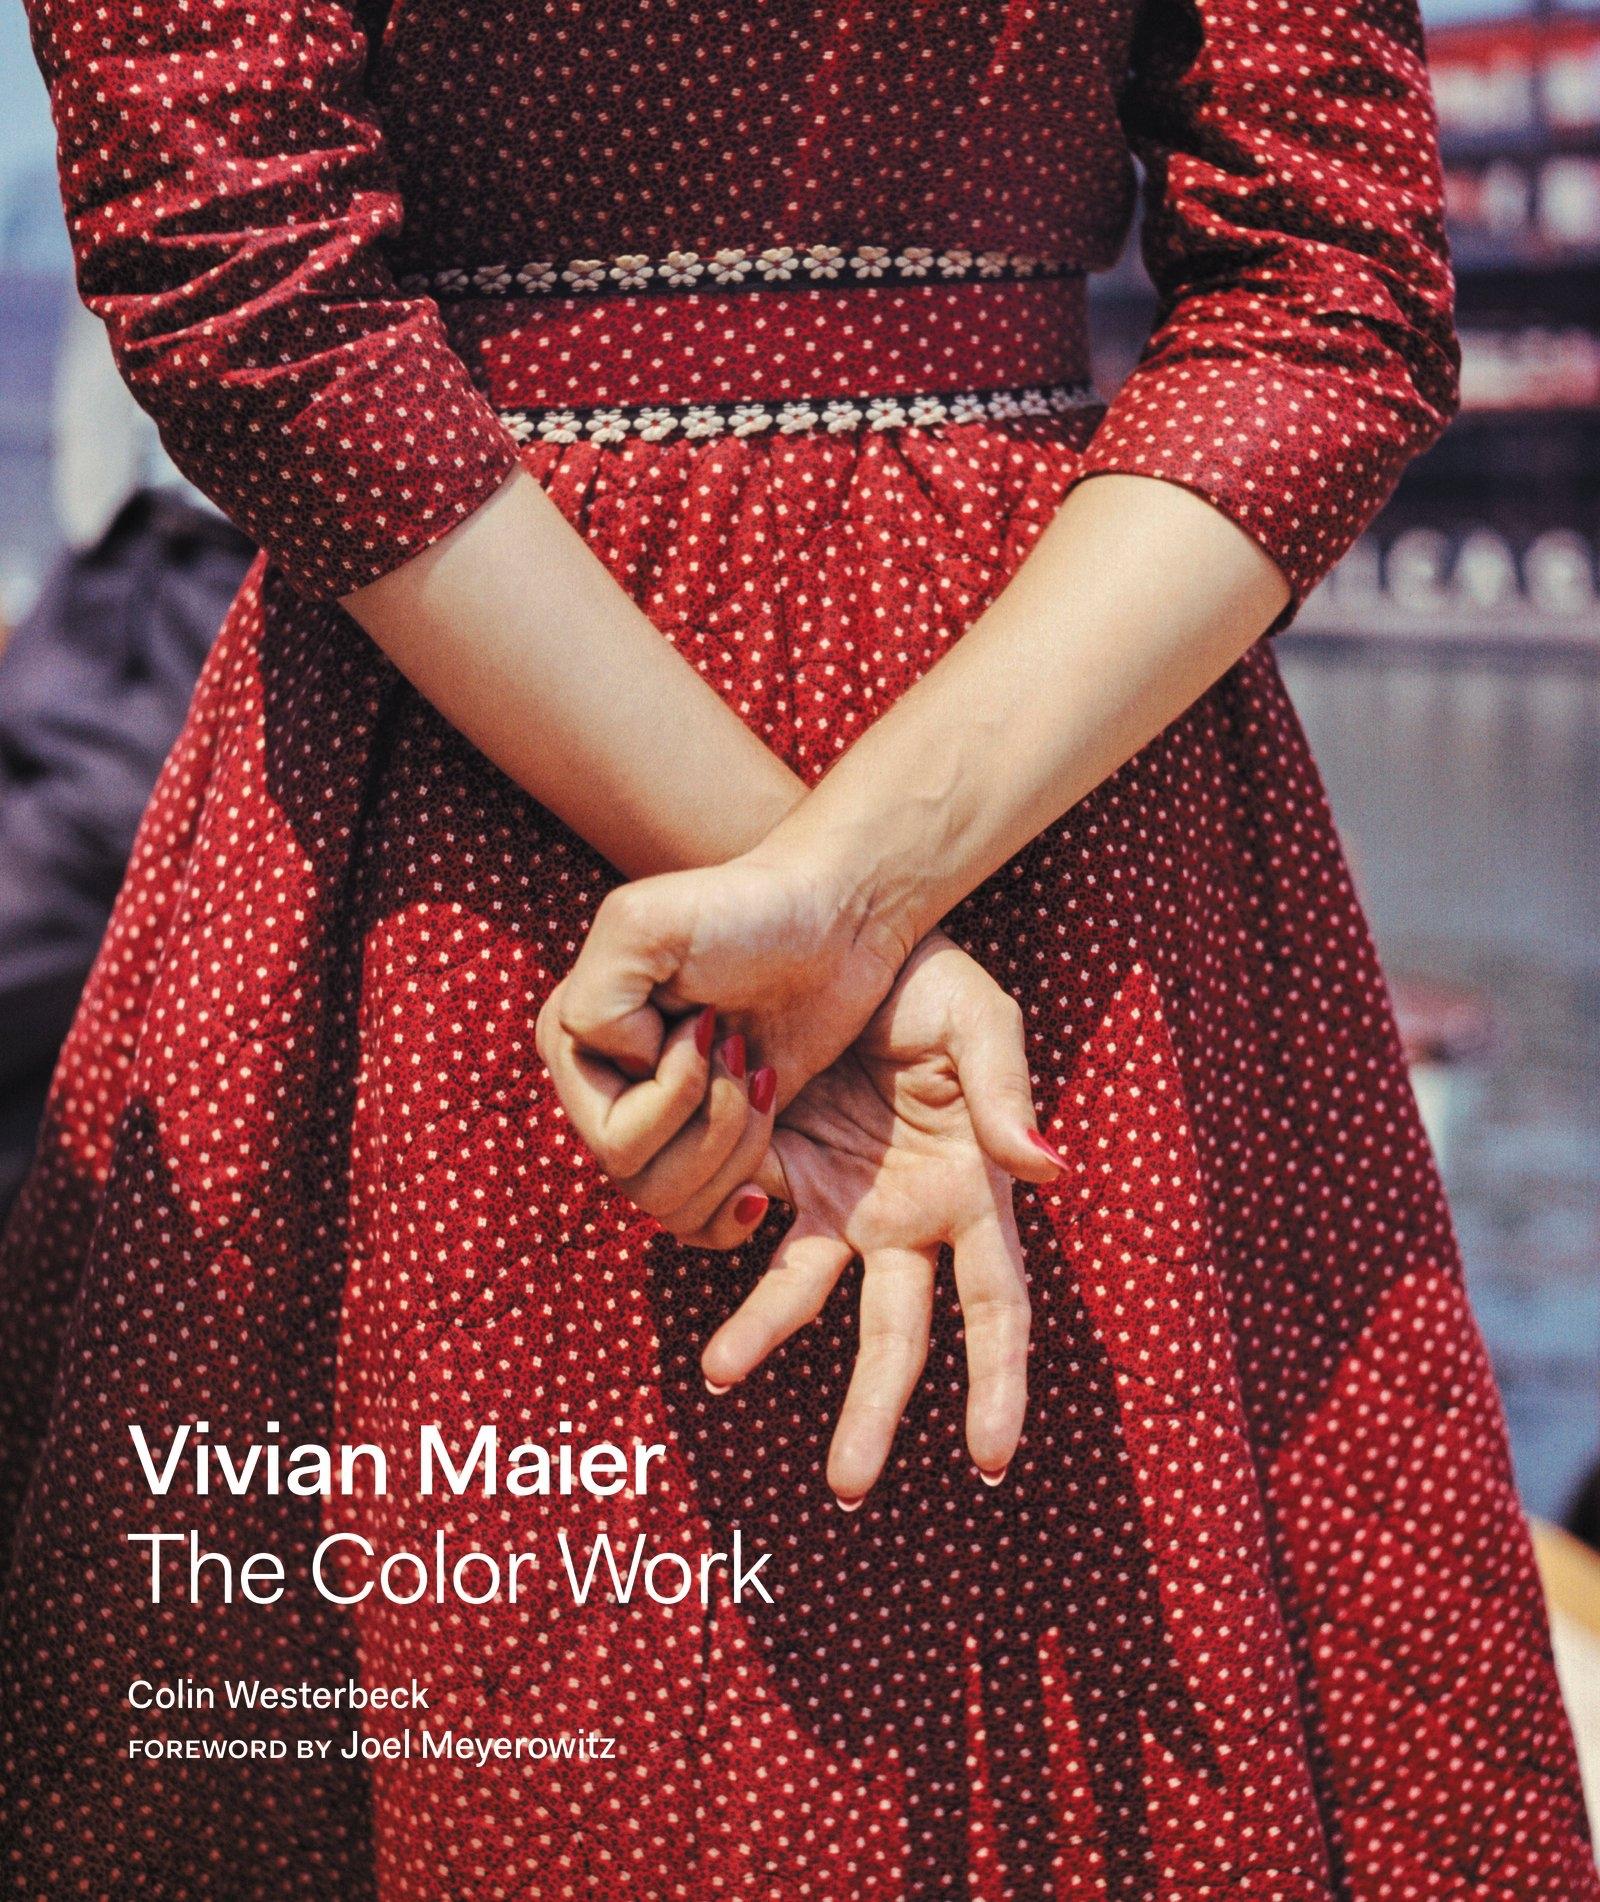 Vivian Maier A Photographer's Life and Afterlife